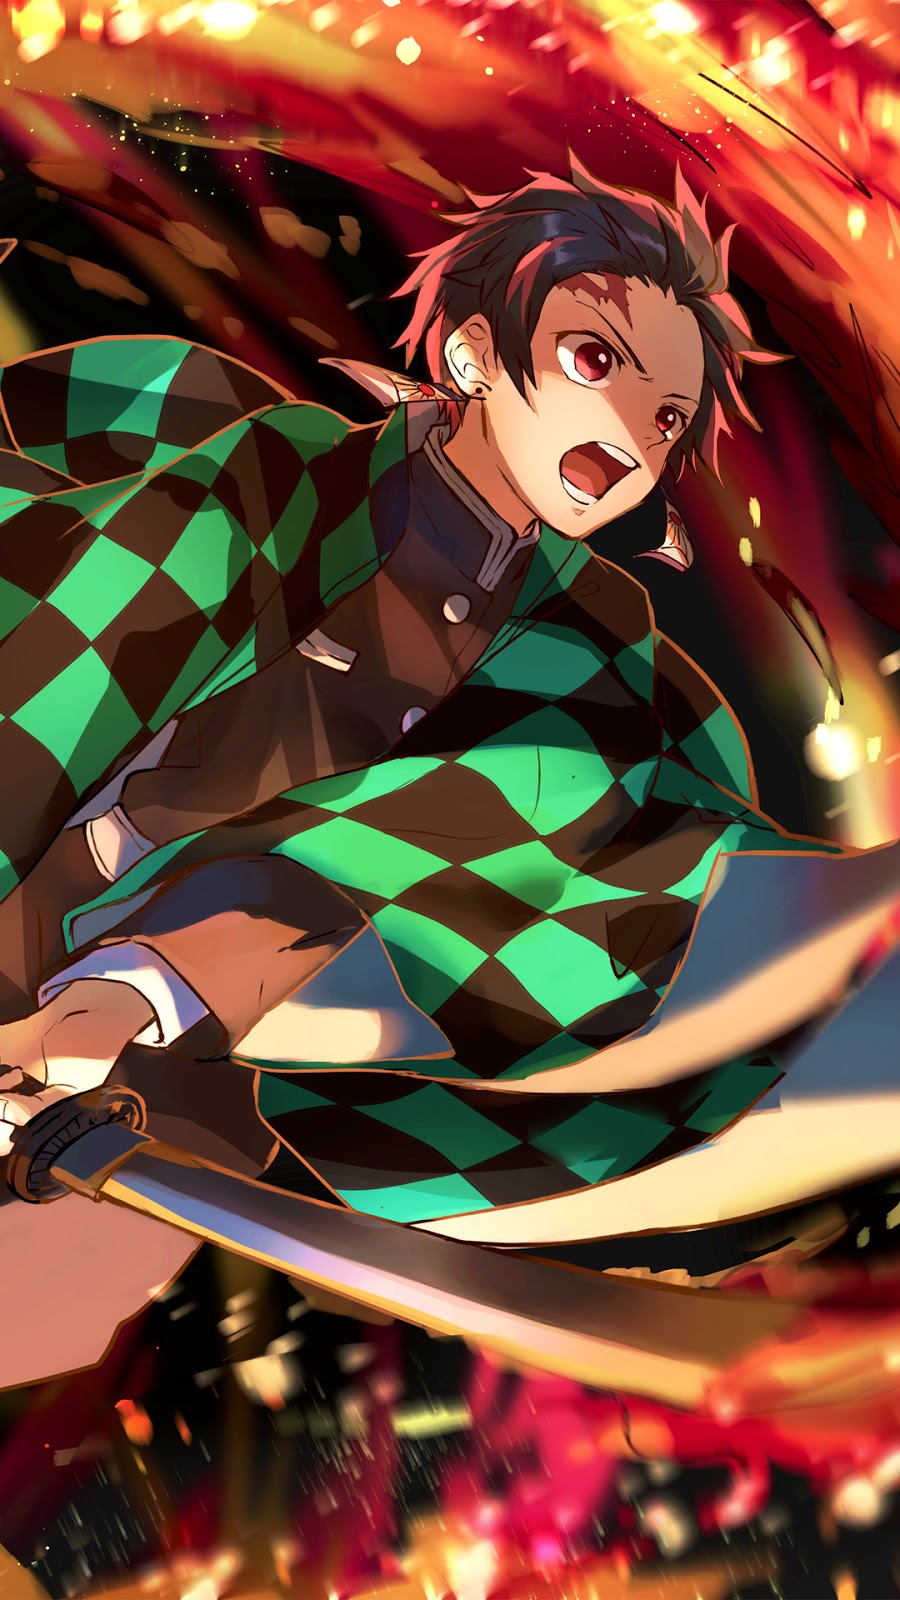 40 Most Beautiful Demon Slayer Wallpapers for Mobile